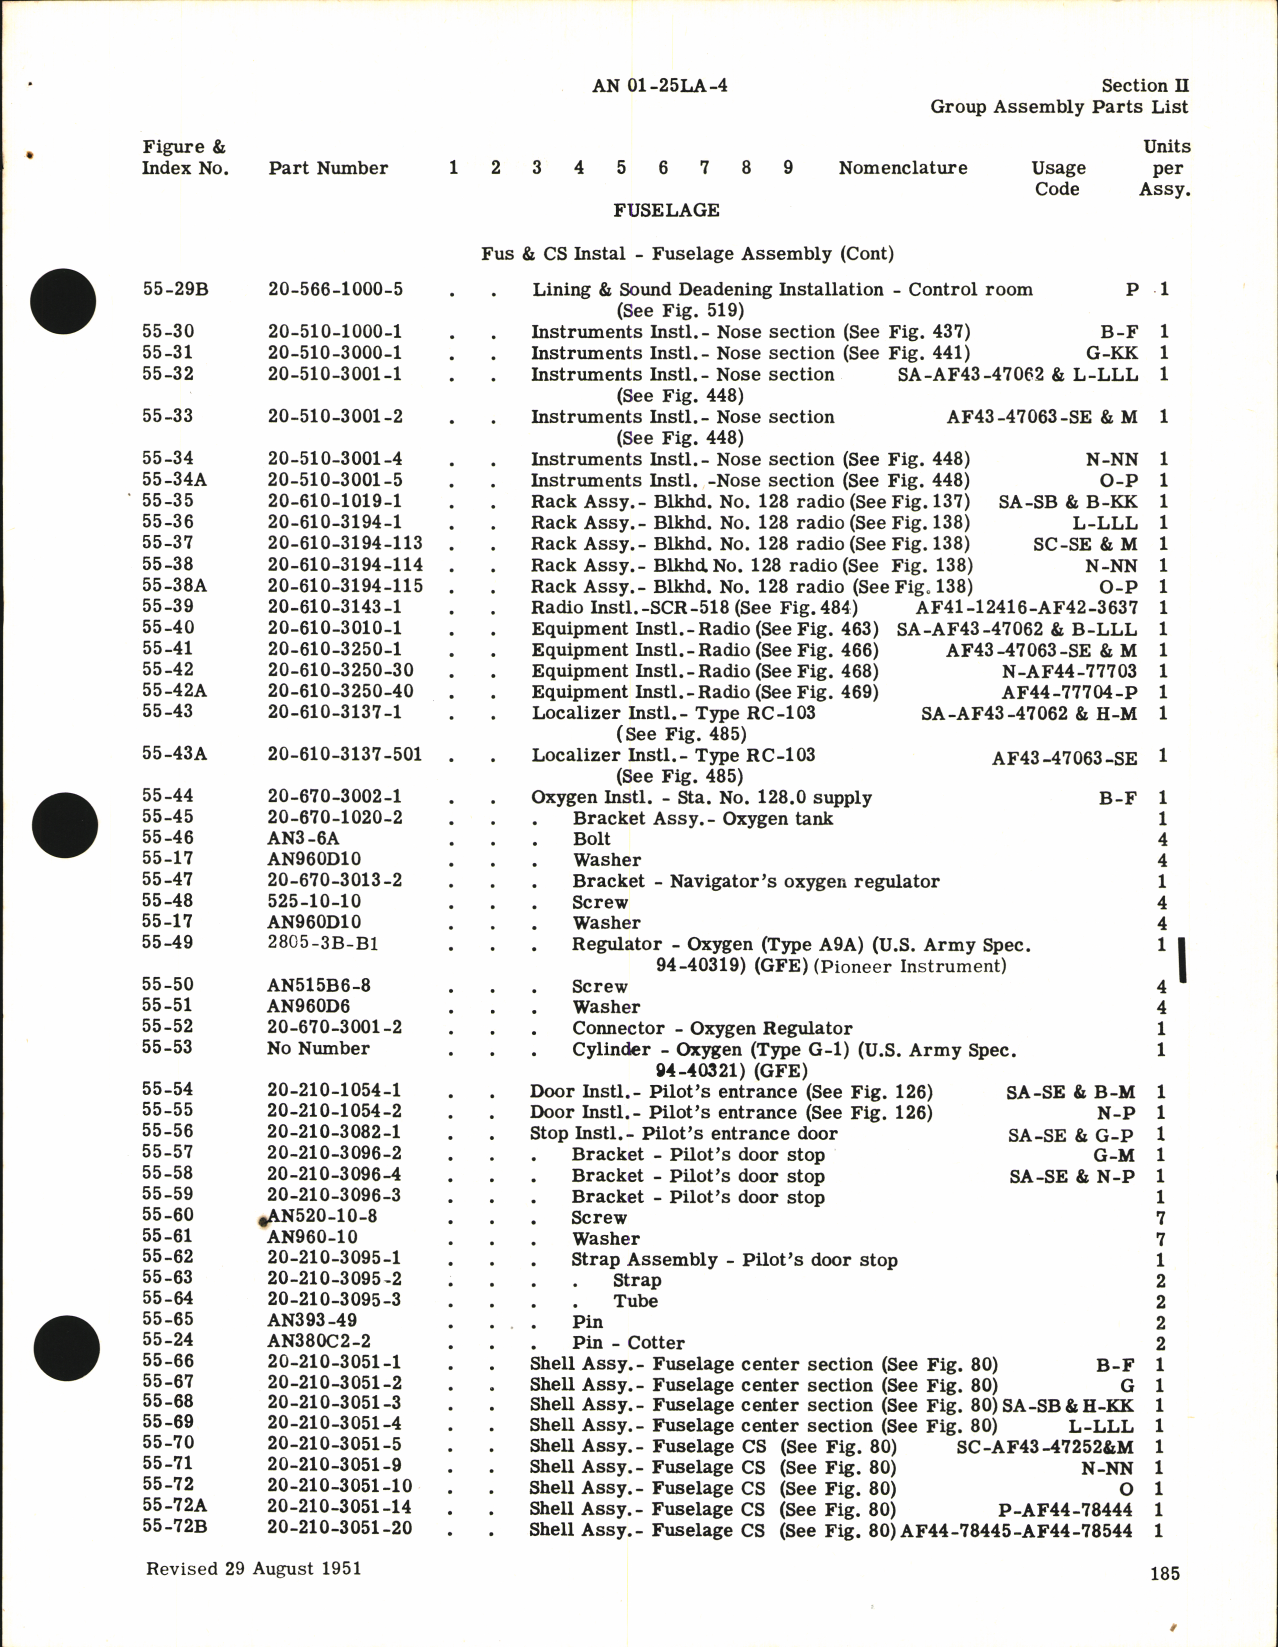 Sample page 5 from AirCorps Library document: Parts Catalog for C-46A, C-46D, and R5C-1